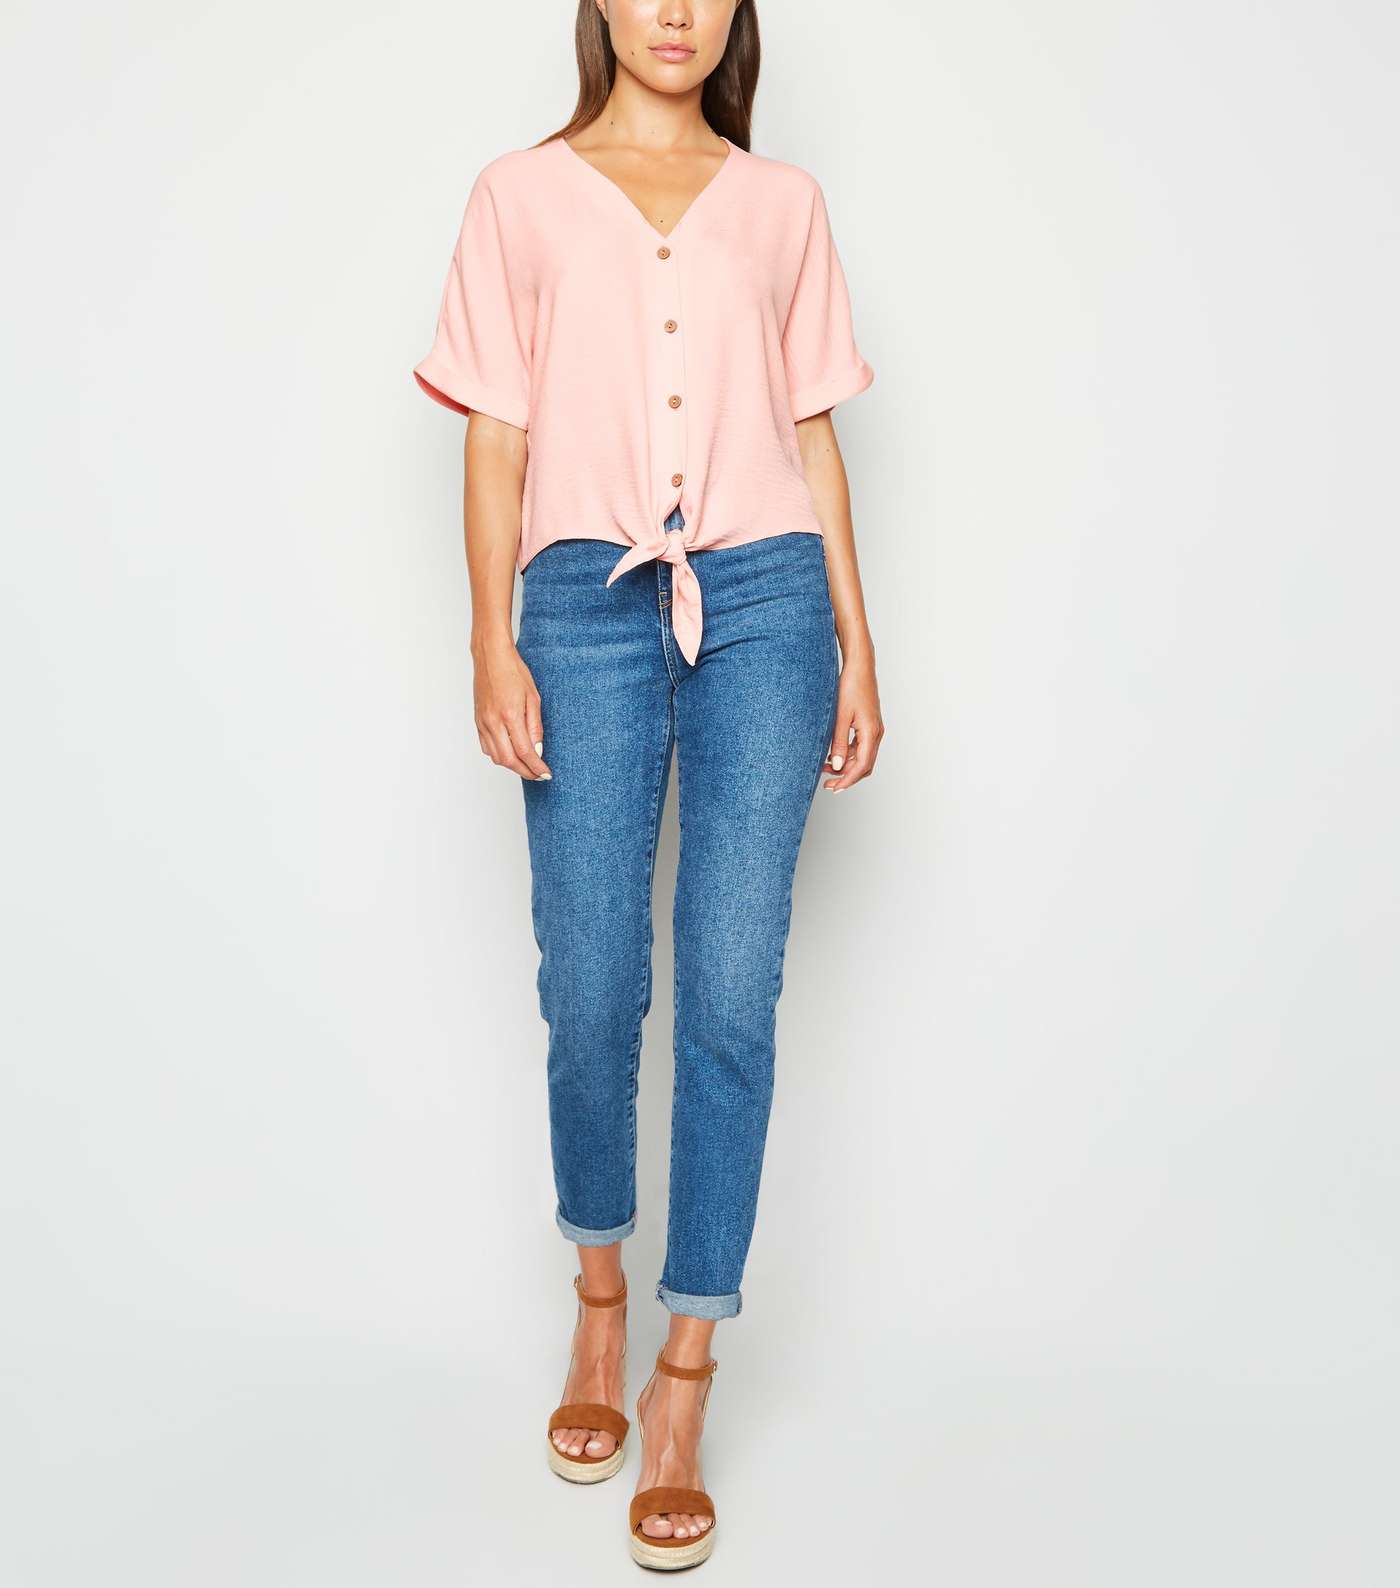 Coral Front Button Up V Neck Shirt